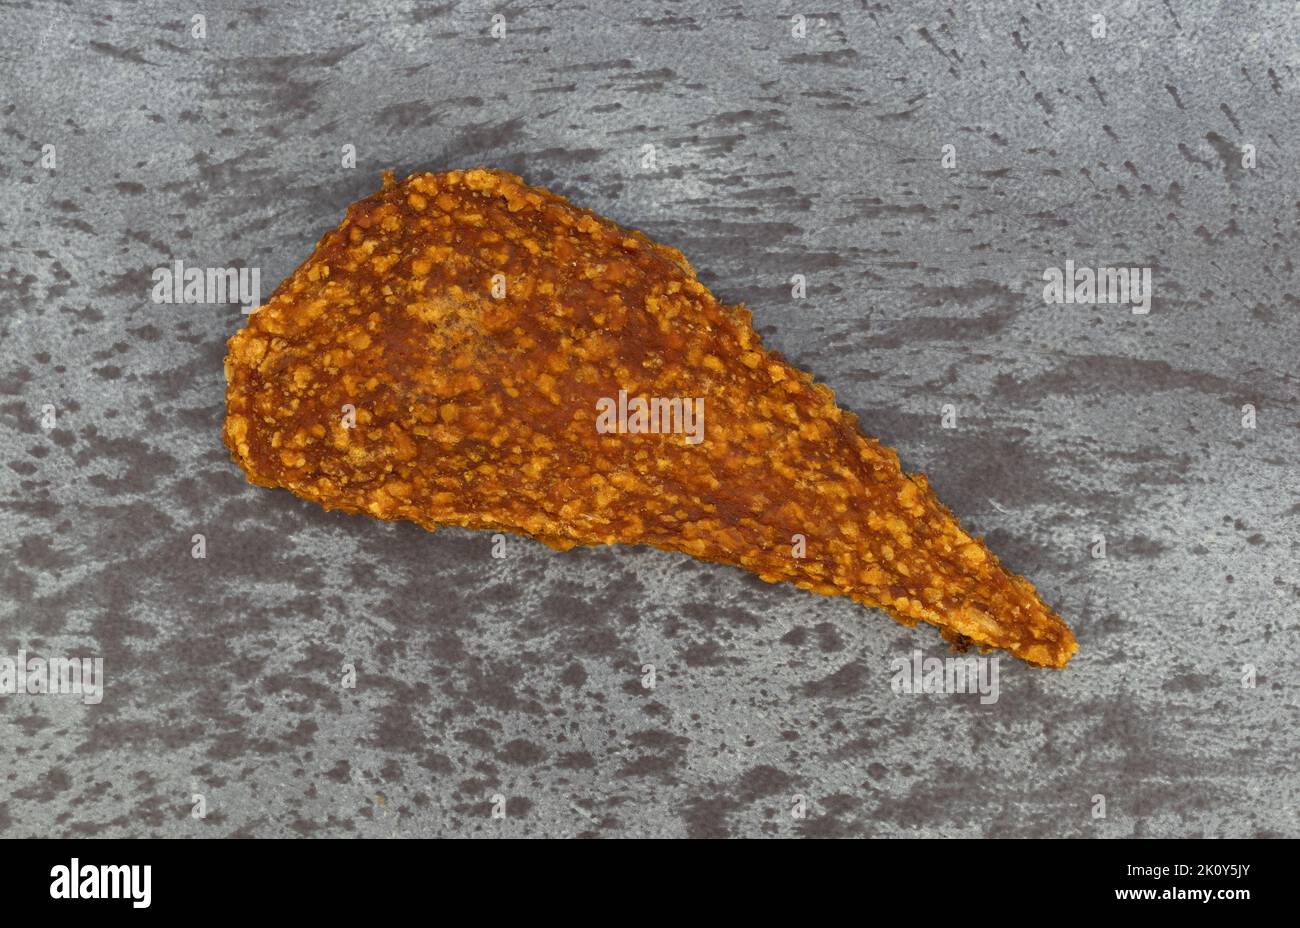 Overhead view of a single slice of duck jerky on a gray mottled background. Stock Photo